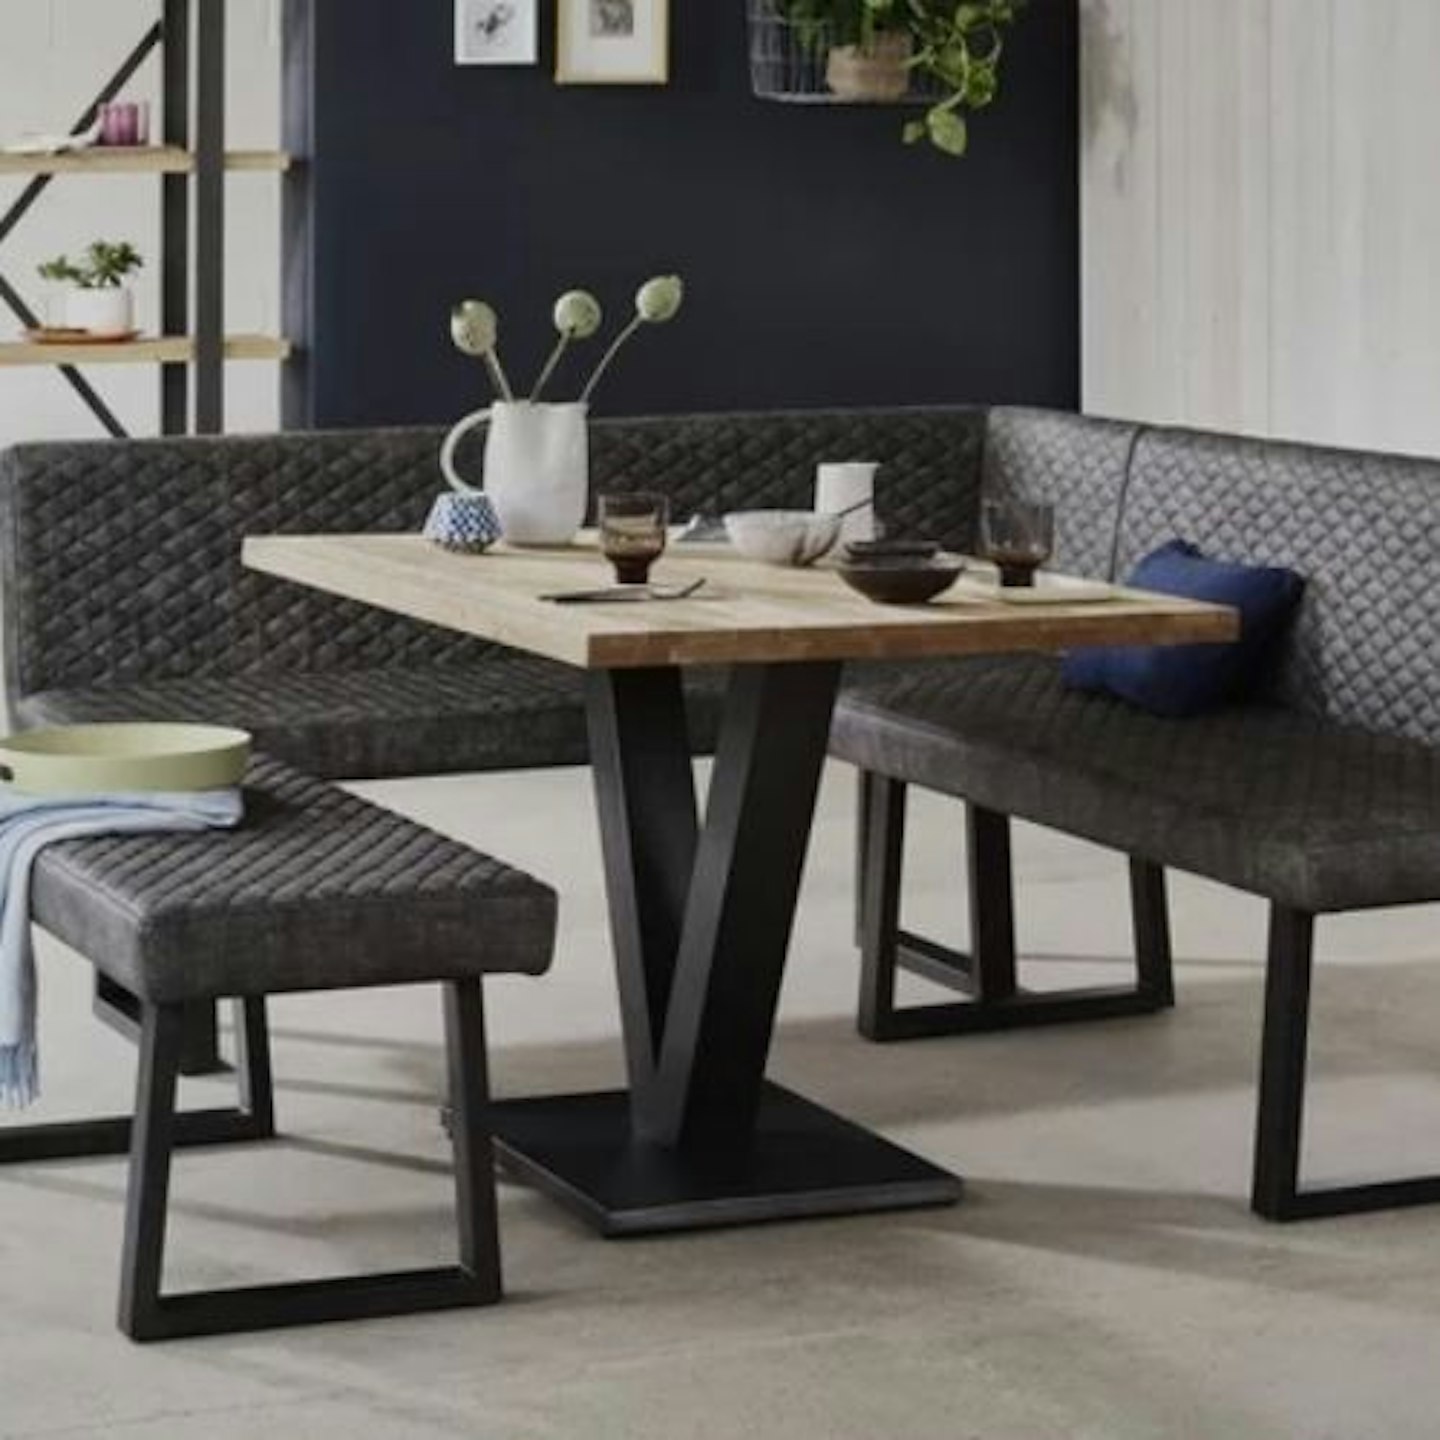 Compact Earth Dining Table, with a Left Hand Facing Corner Bench and Low Dining Bench